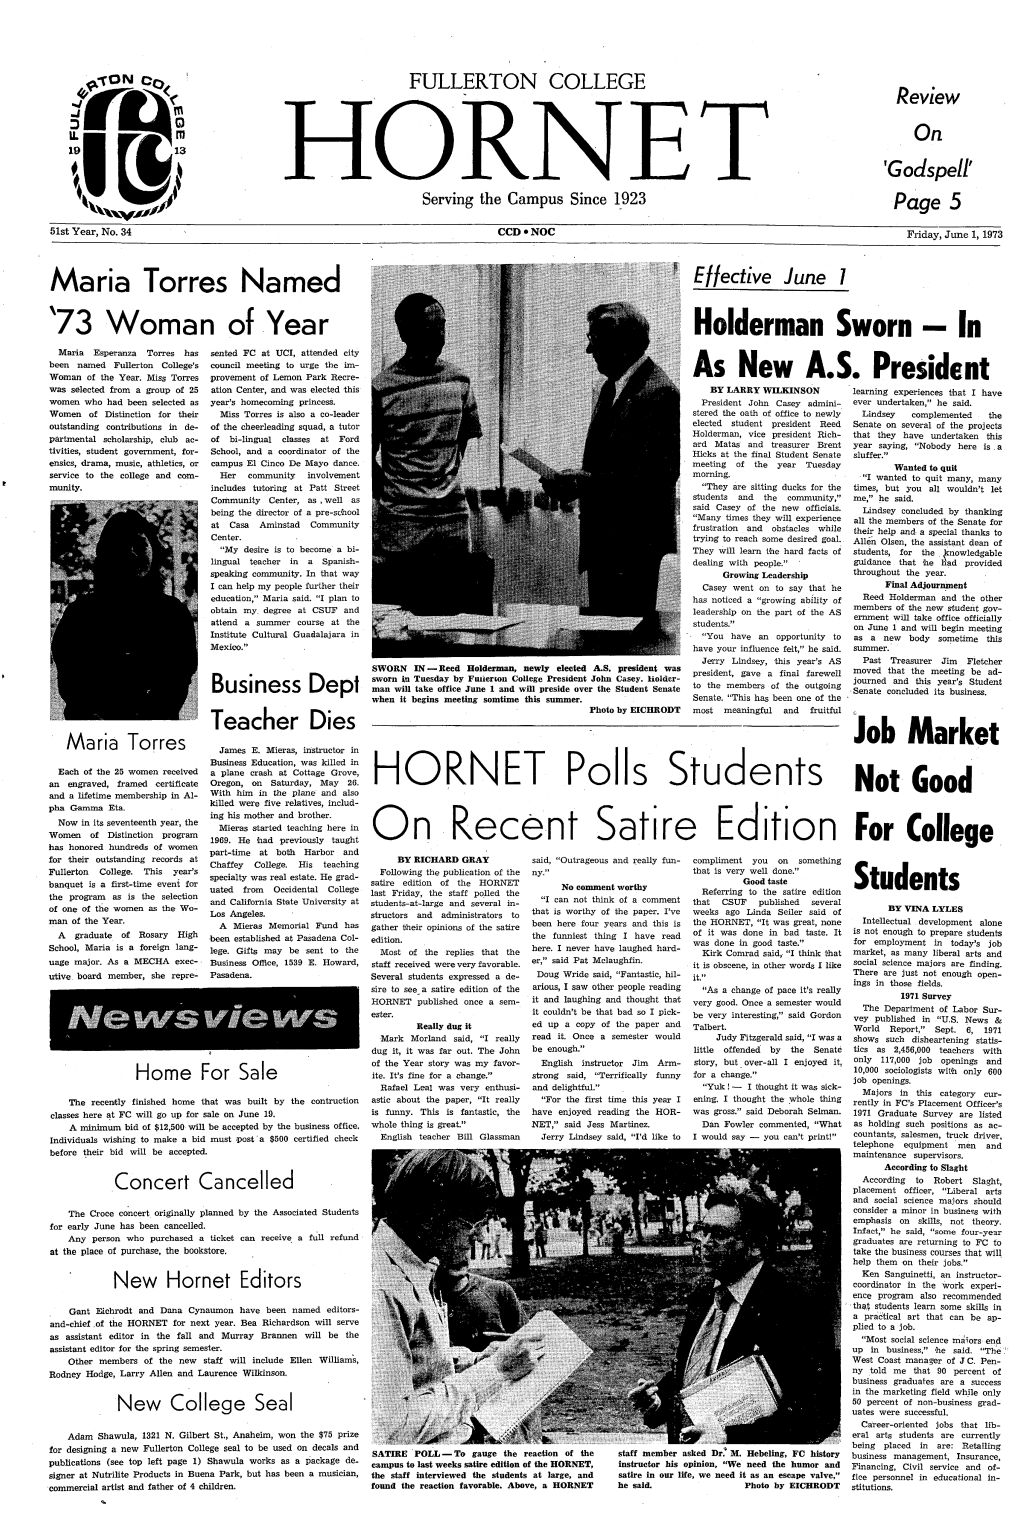 The Hornet, 1923 - 2006 - Link Page Previous Volume 51, Issue 33 Next Volume 52, Issue 1